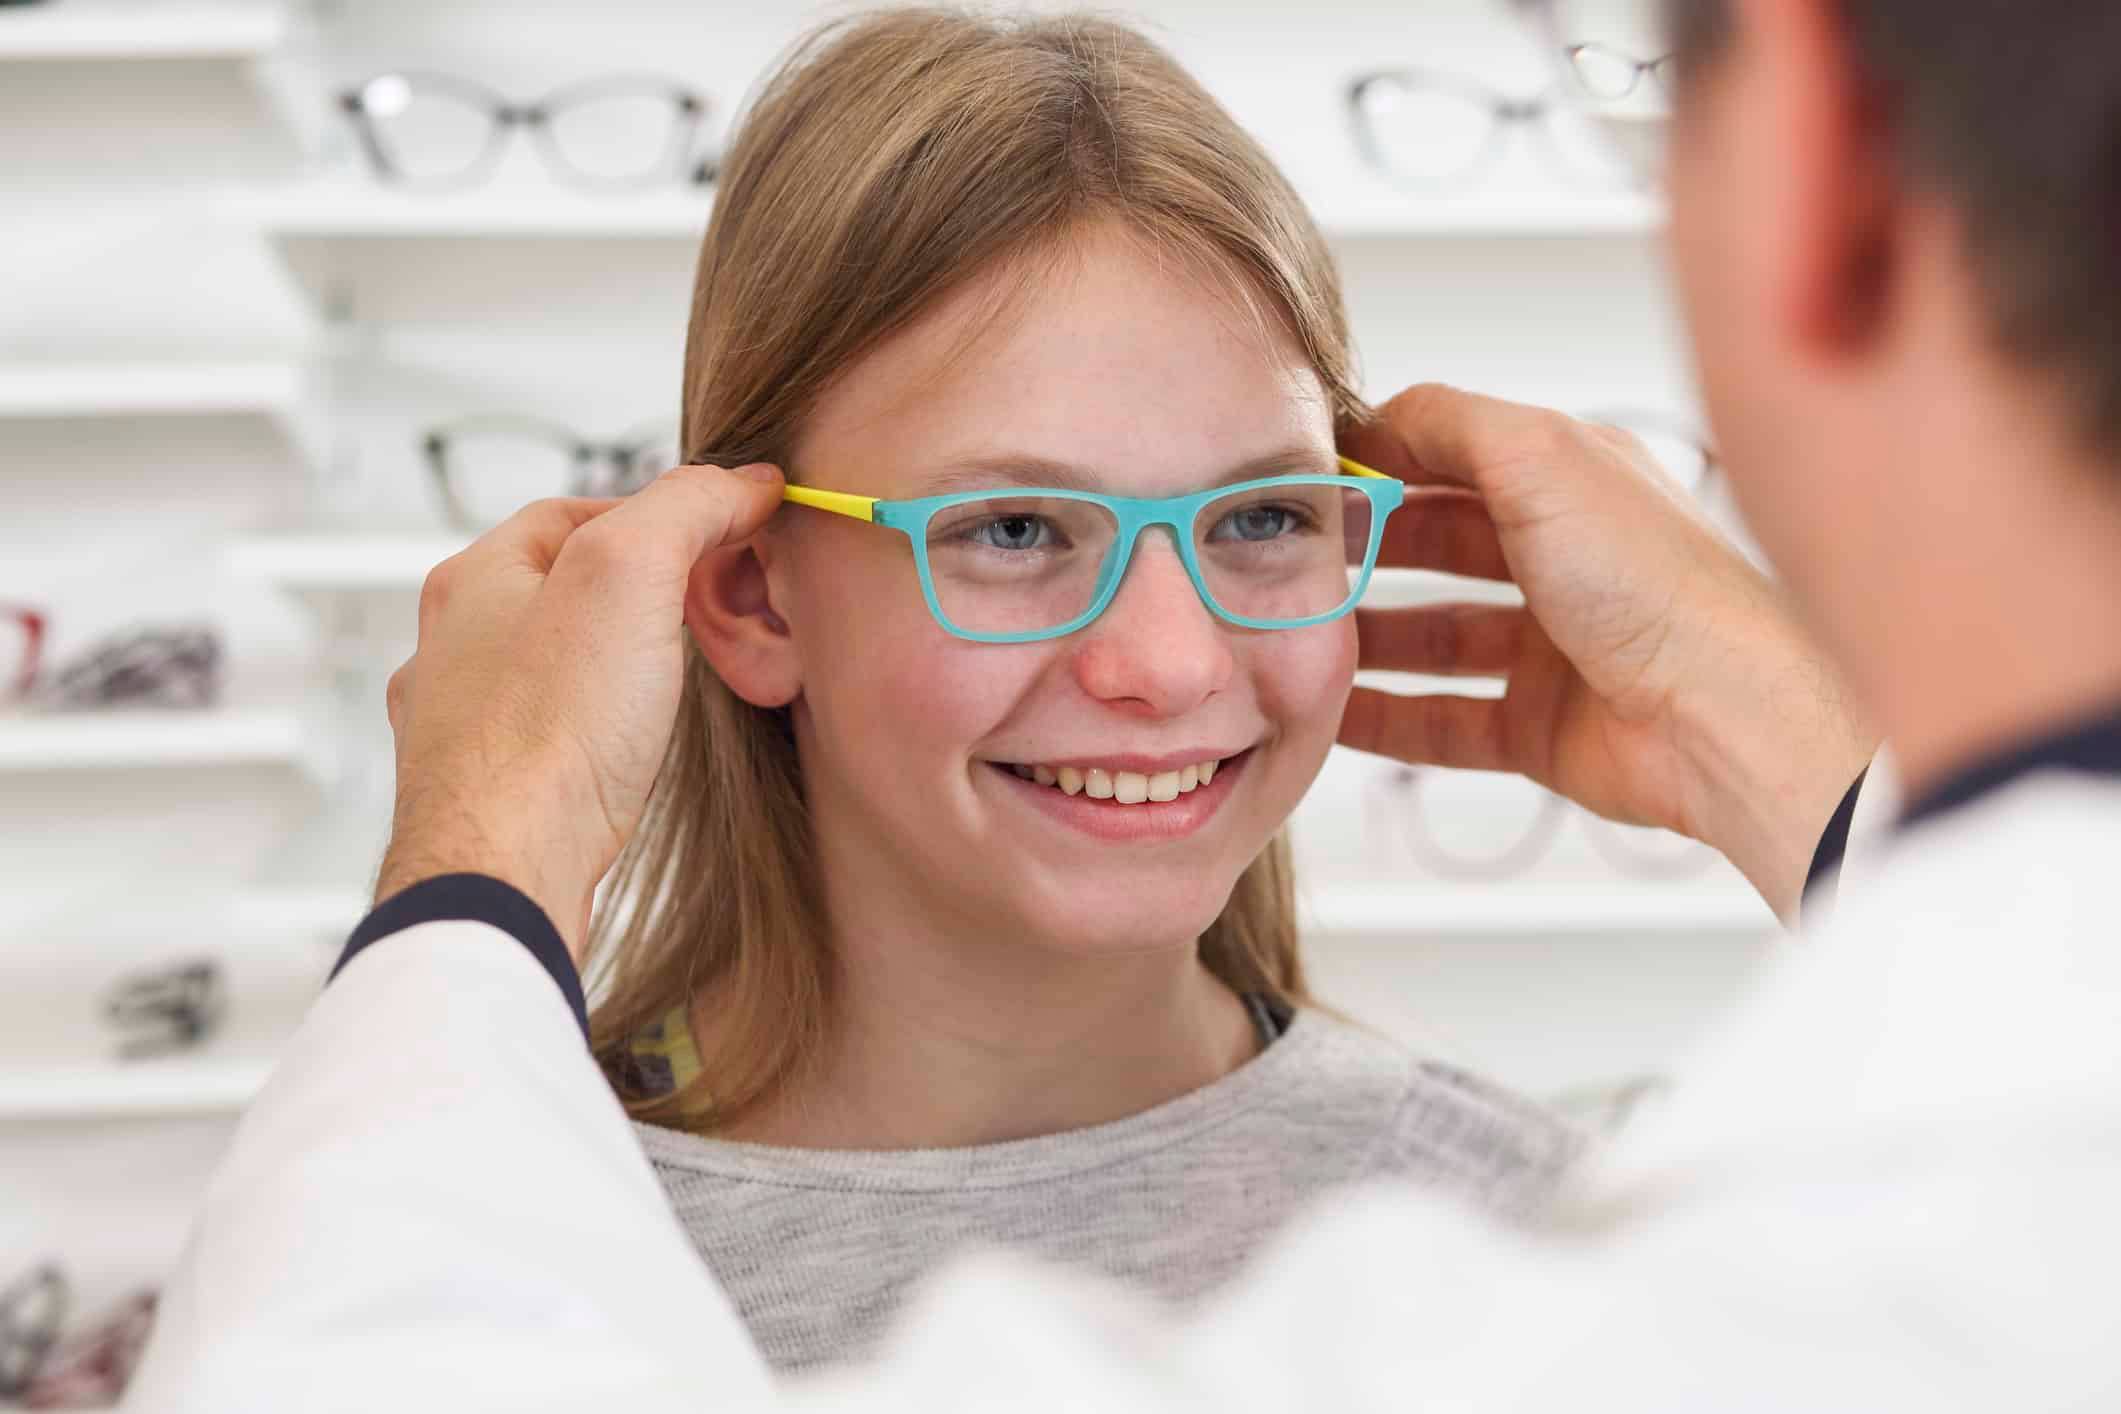 Children’s vision: How do I know if my child needs glasses?